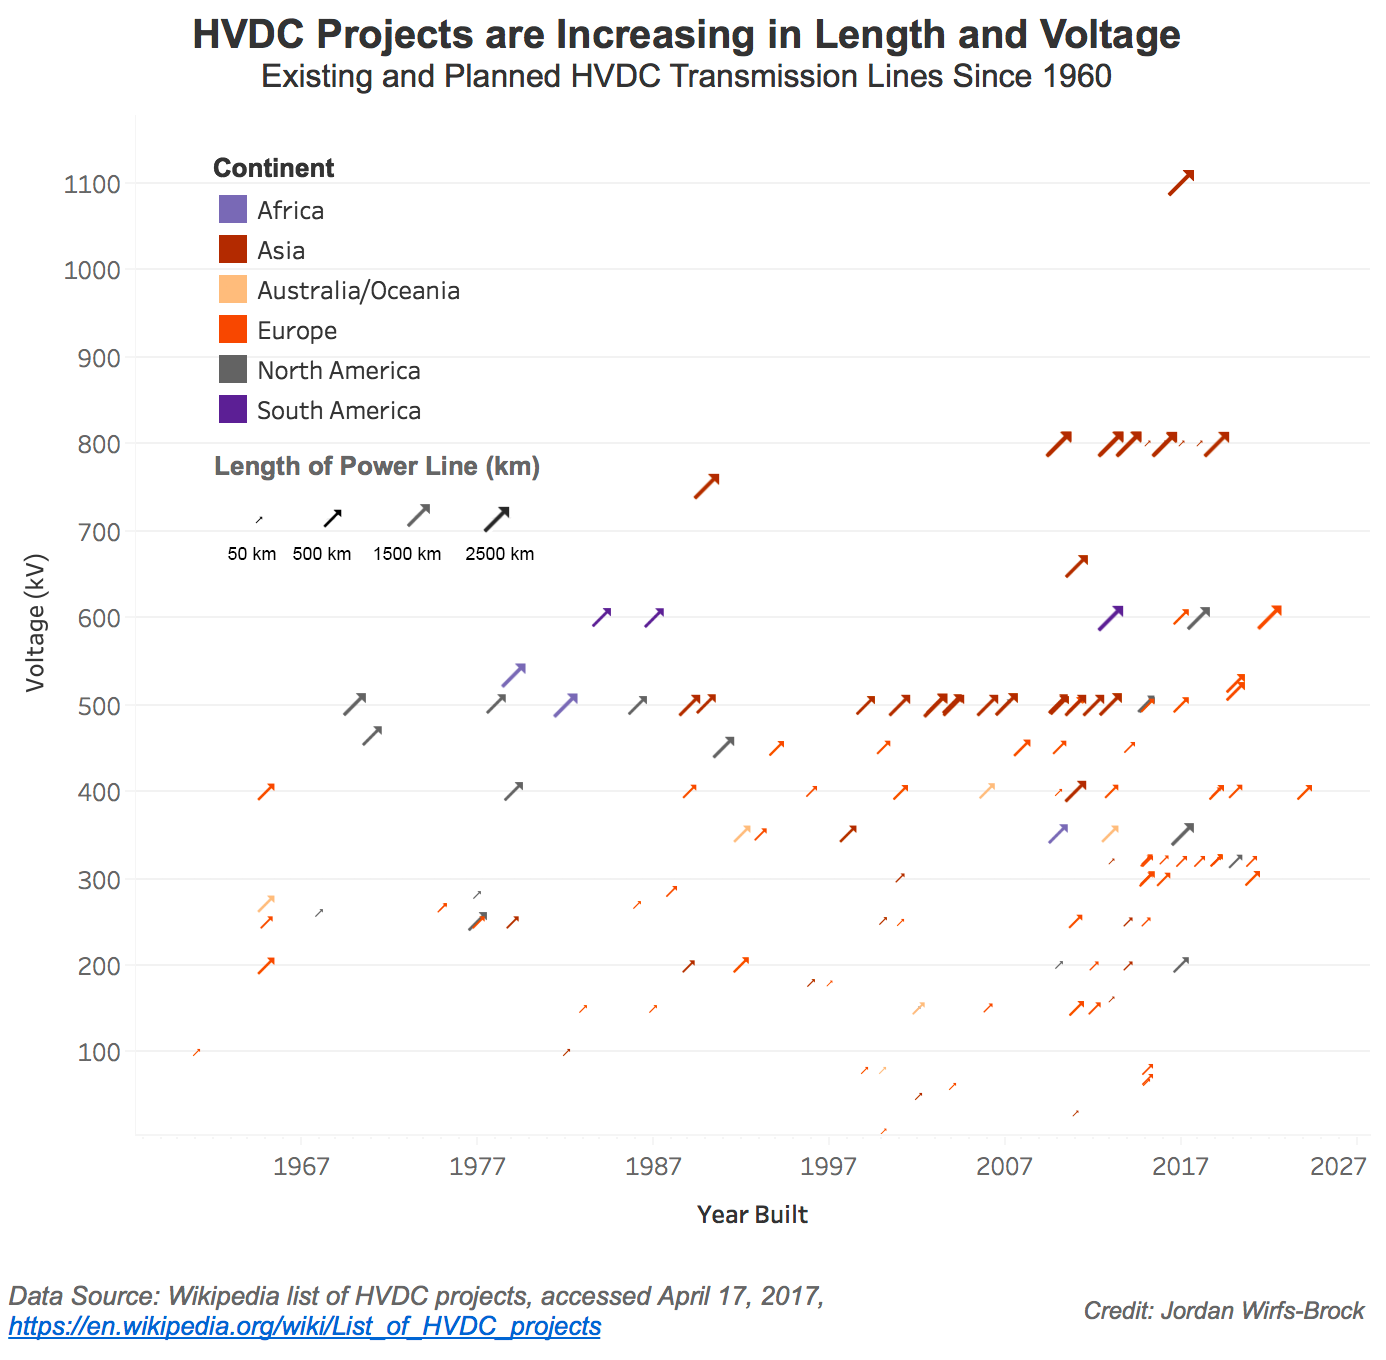 HVDC Projects are Increasing in Length and Voltage: Existing and Planned HVDC Transmission Lines Since 1960